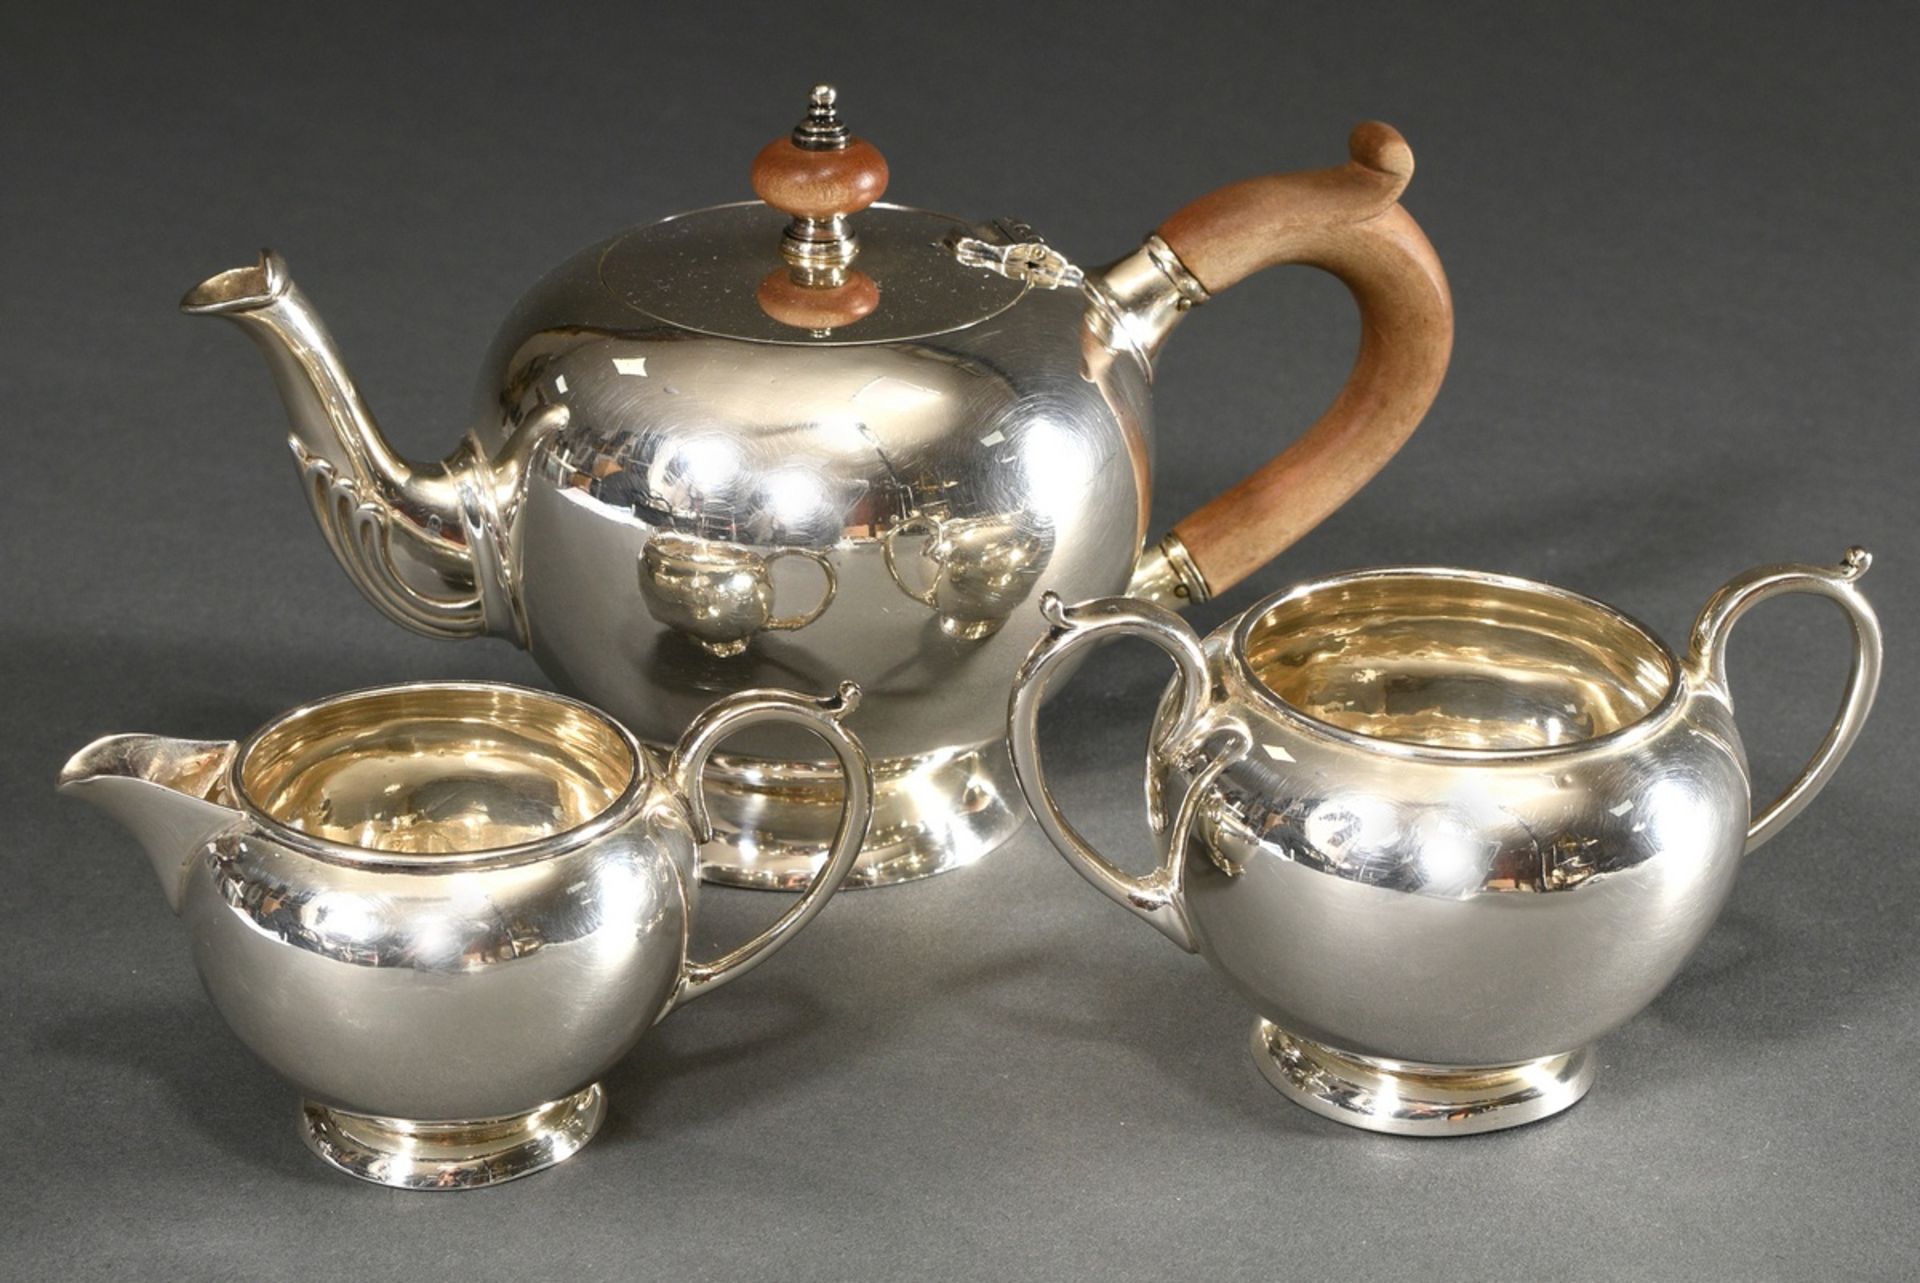 3 Pieces English tea set in George II form: teapot with wooden handle and two parts sugar and cream